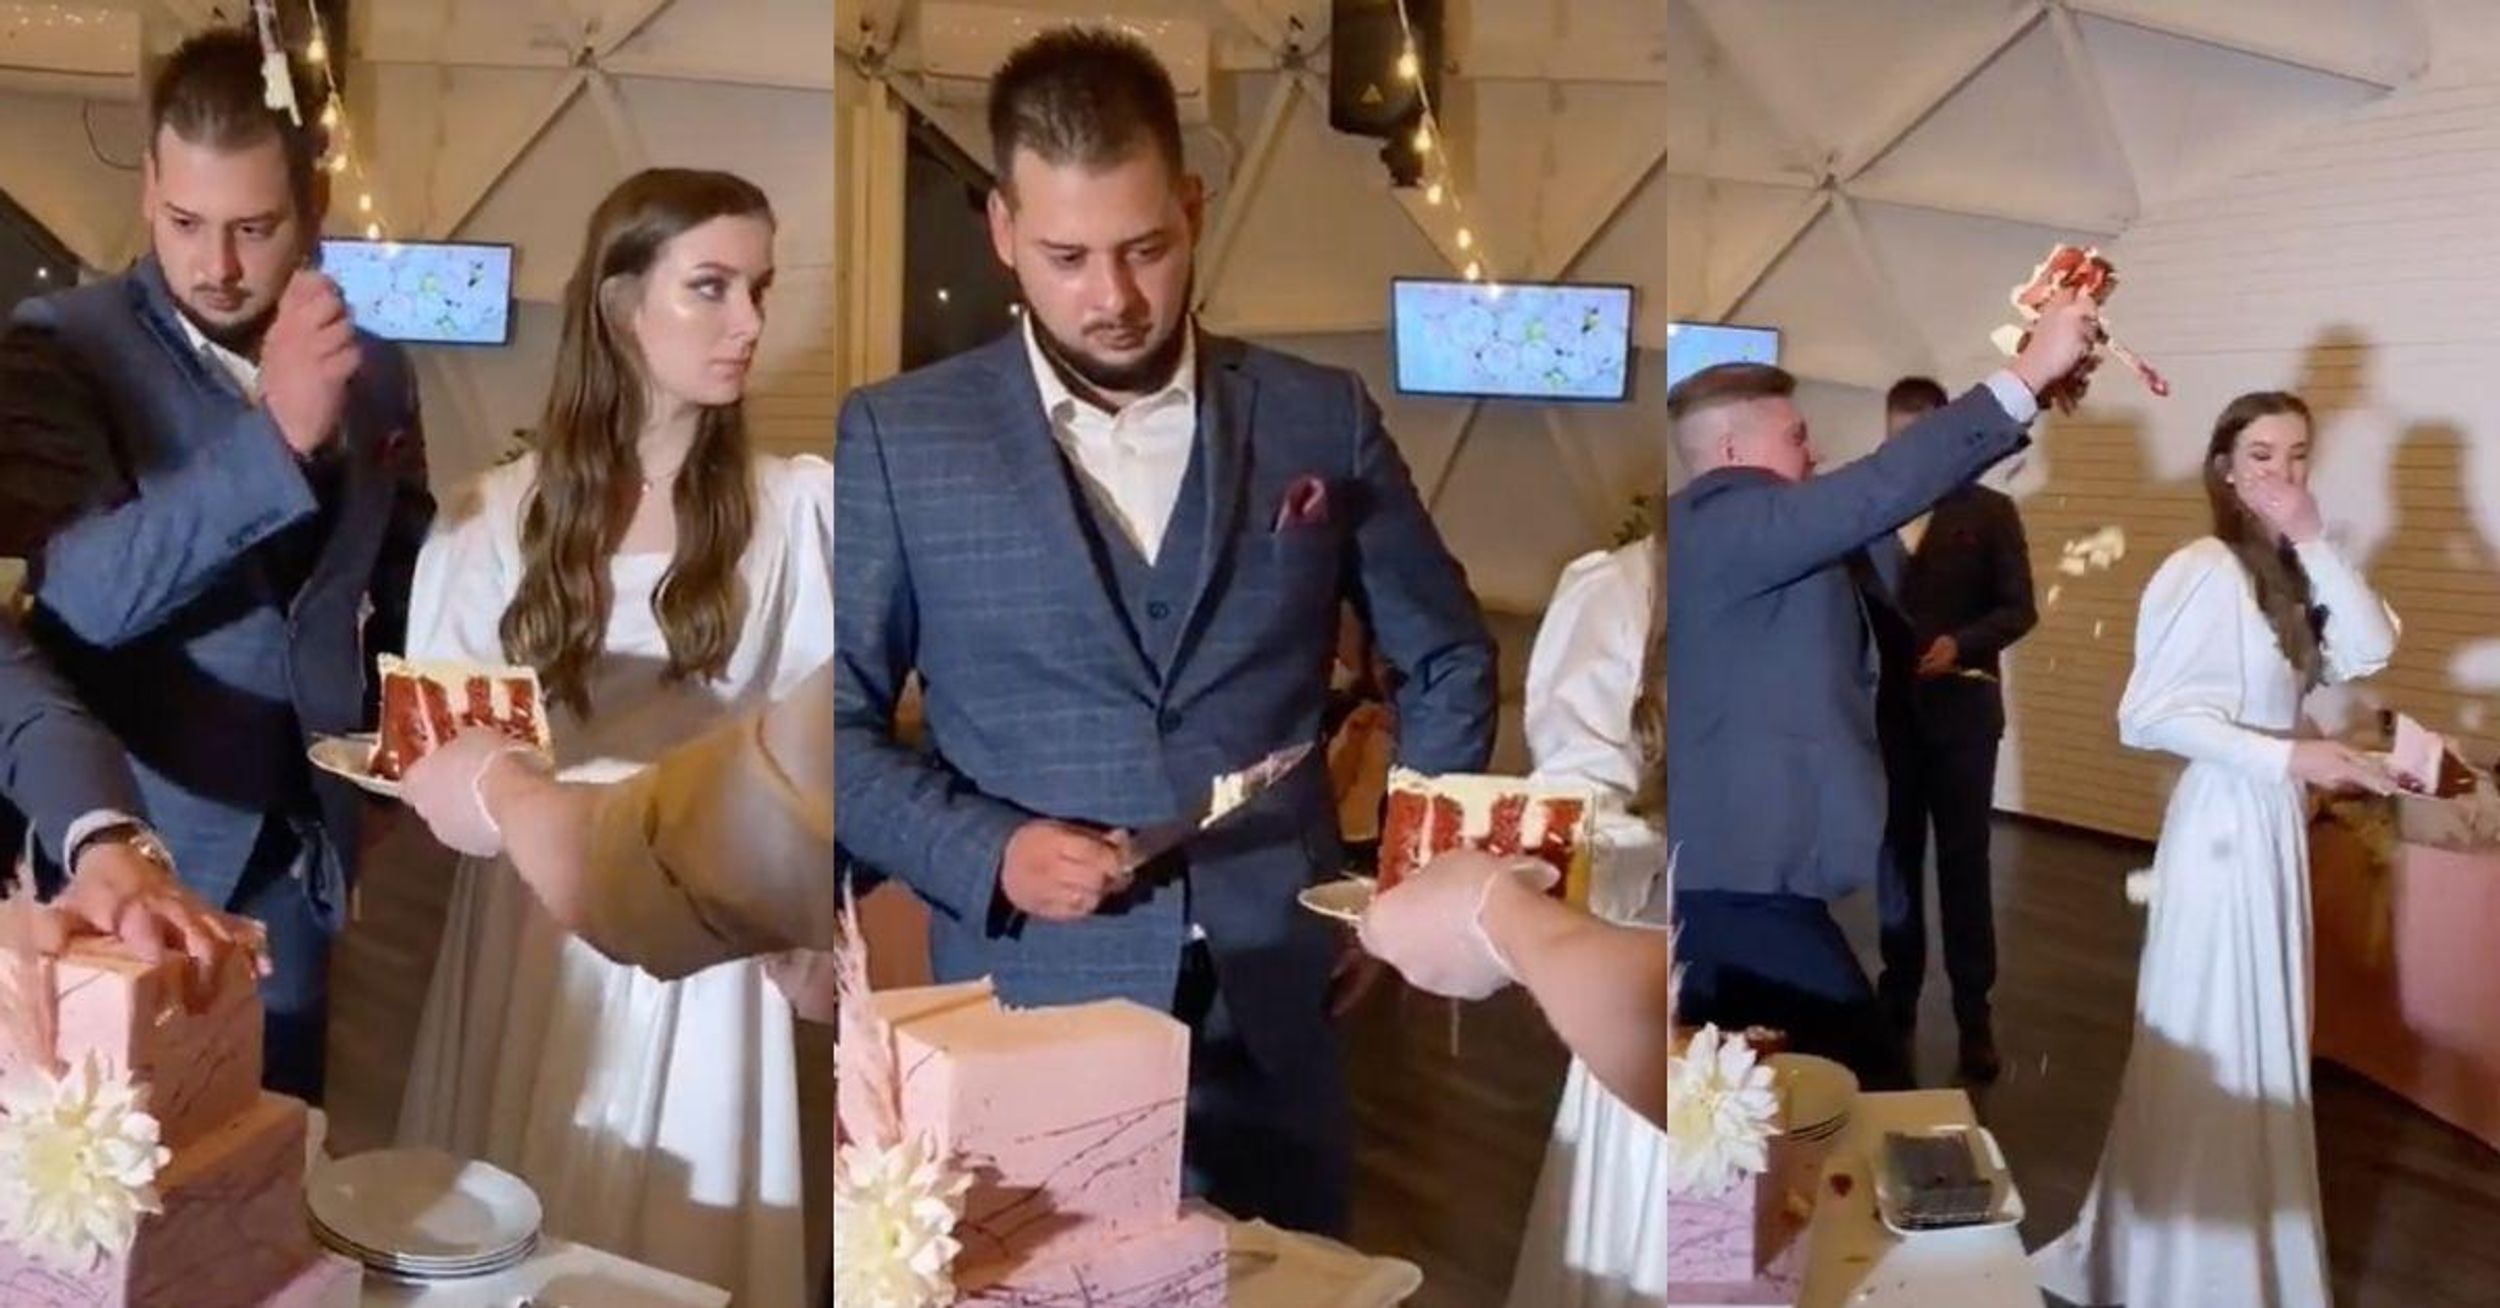 Groom Furious After Drunk Guest Smashes His Wedding Cake And Tries To Dump It On The Bride